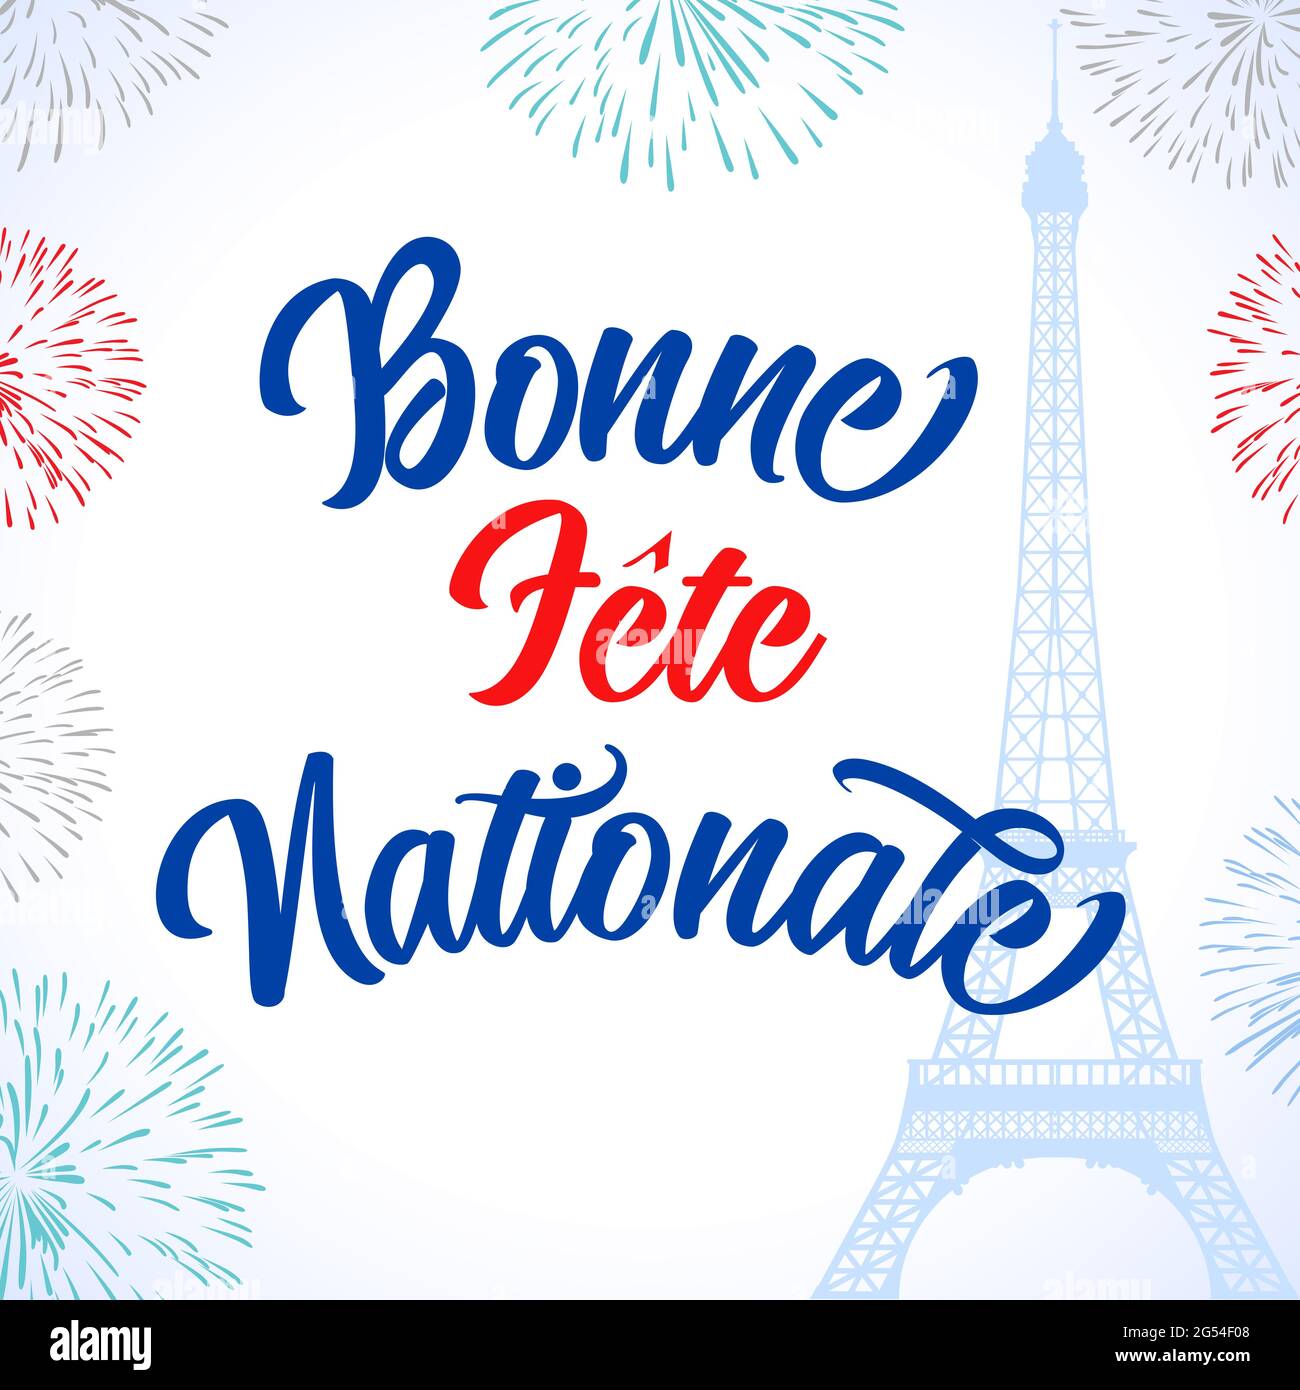 Bonne fete nationale French lettering text, translated Happy National Day. Celebrate Bastille Day, banner for France holiday with Eiffel tower Stock Vector